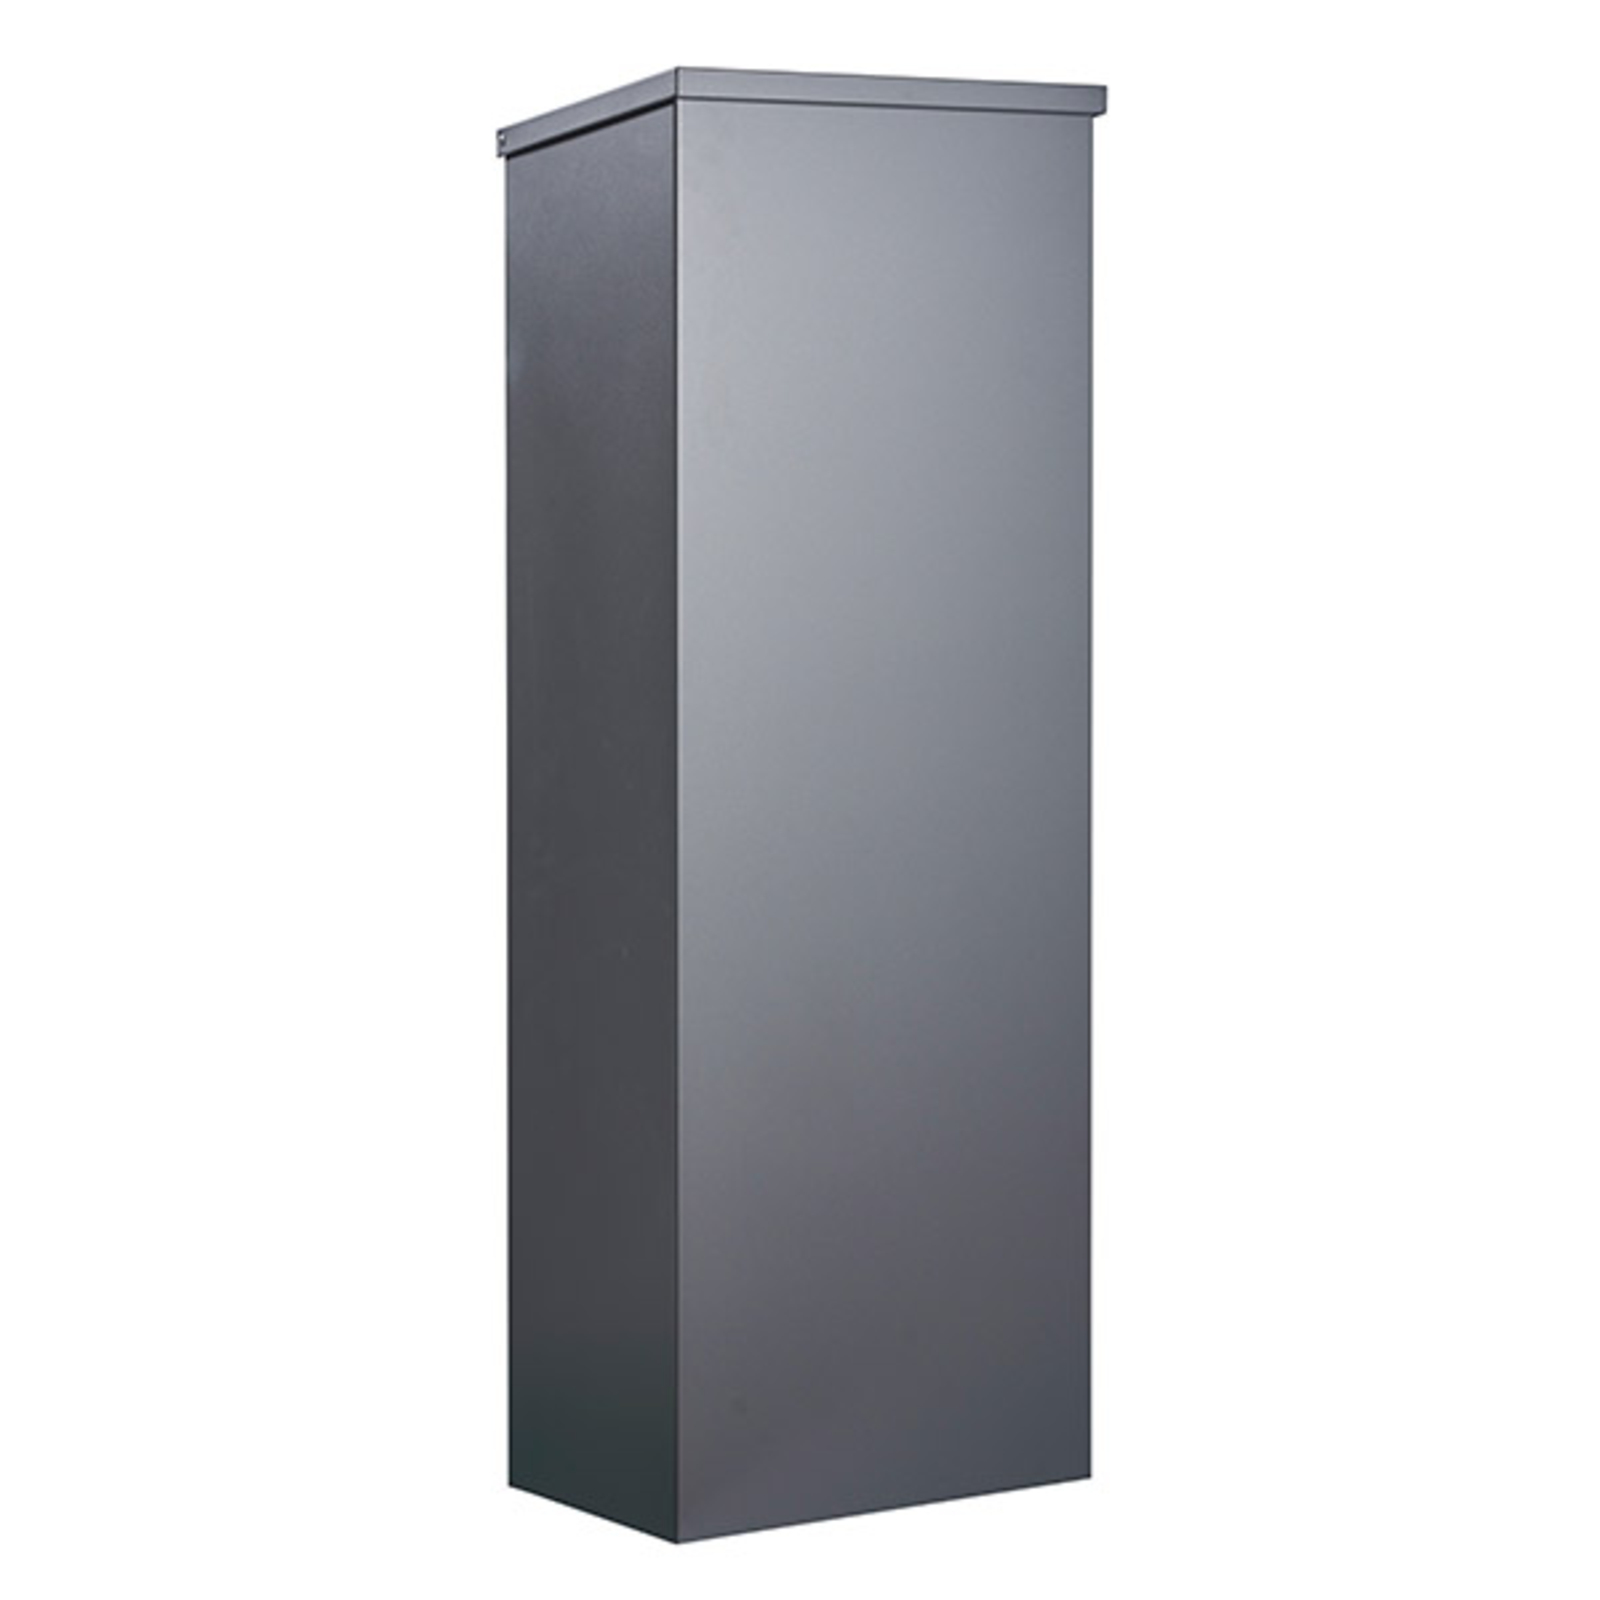 Allux 600AN-B free-standing letterbox, anthracite